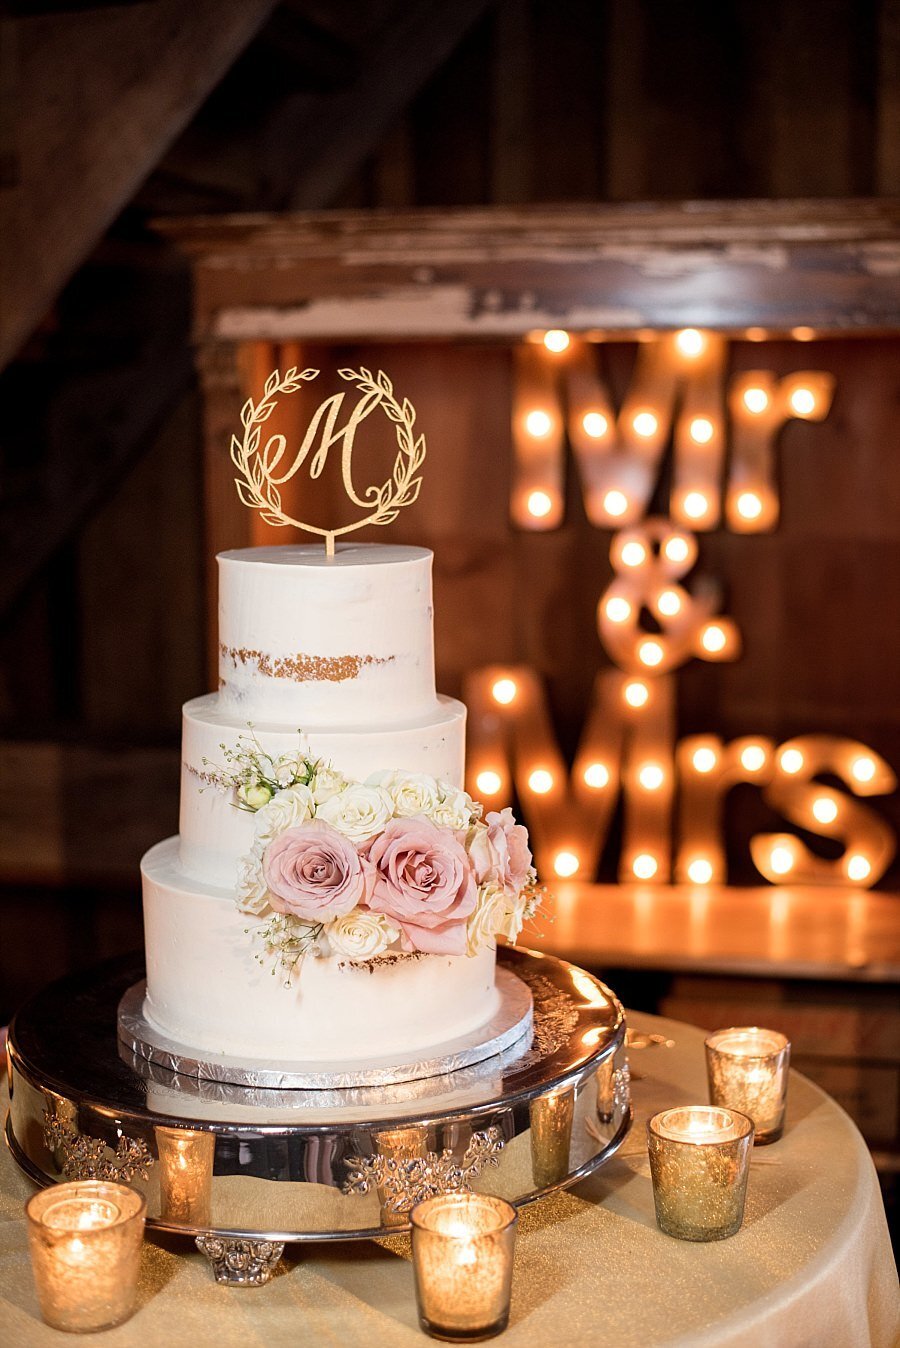 Three tier naked wedding cake with clush roses and Monogram cake topper, light up Mr and Mrs sign behind